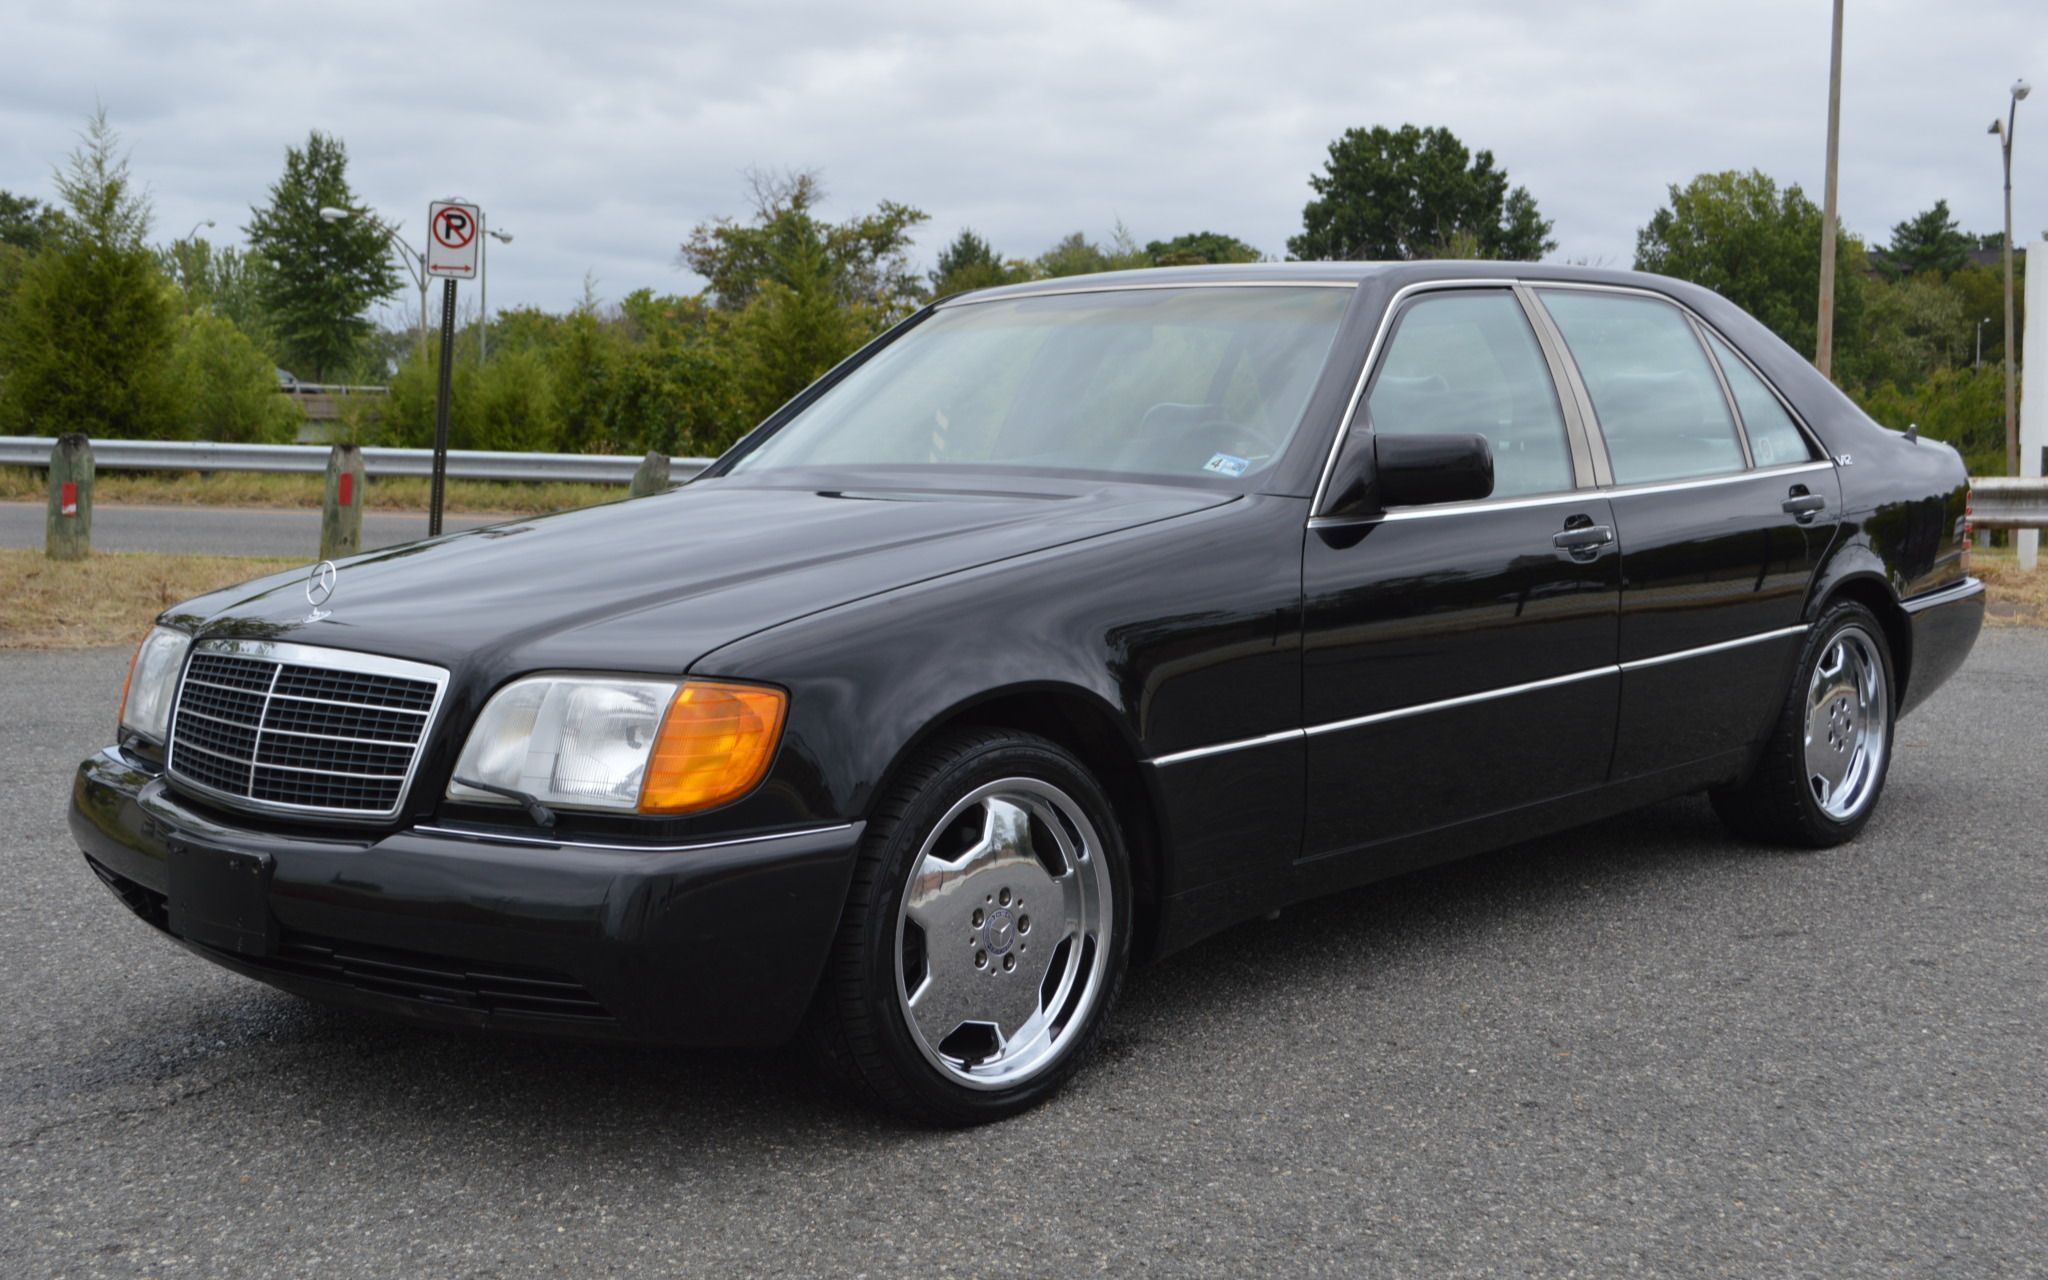 Prices vary wildly on used 1992 Mercedes-Benz 600SELs